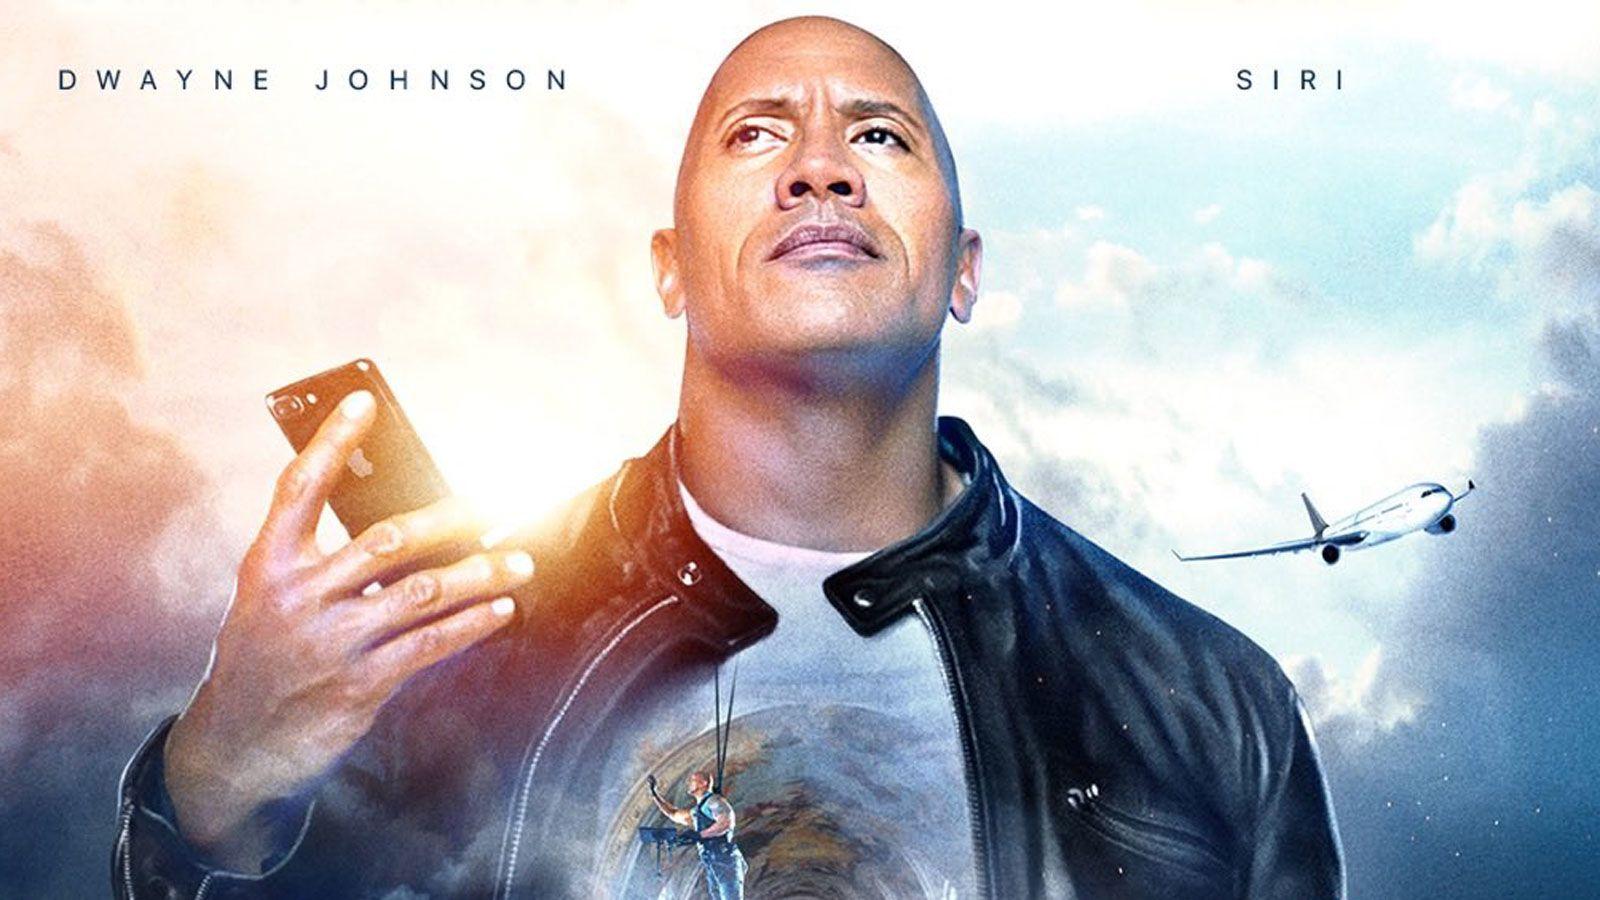 Dwayne Johnson and Apple made a Siri movie (update: live)